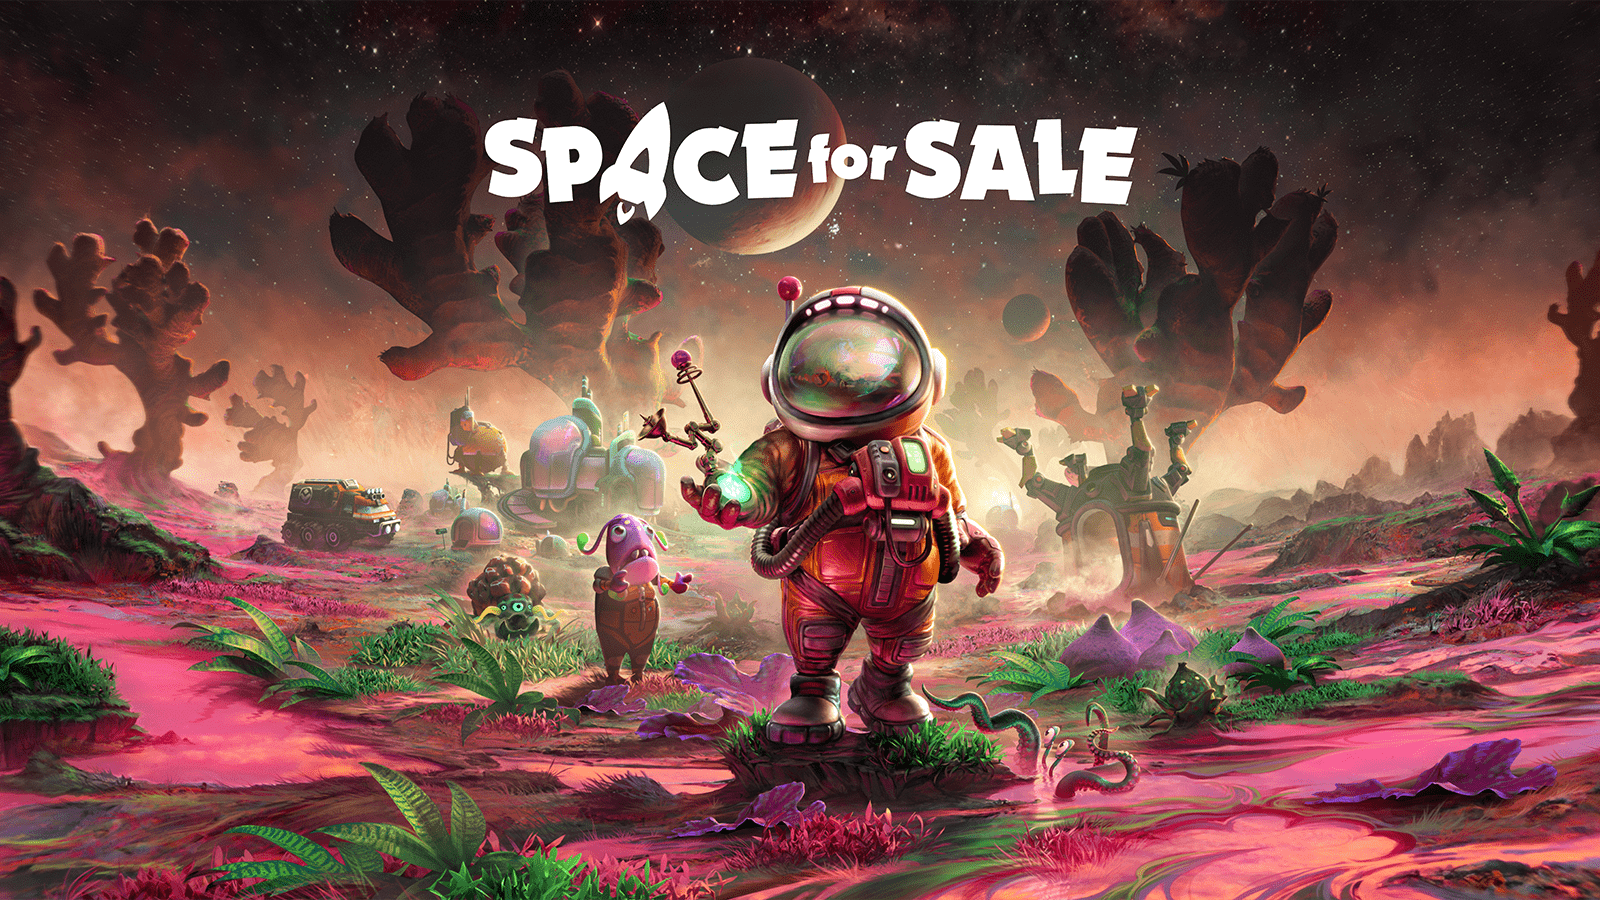 Space for sale covers